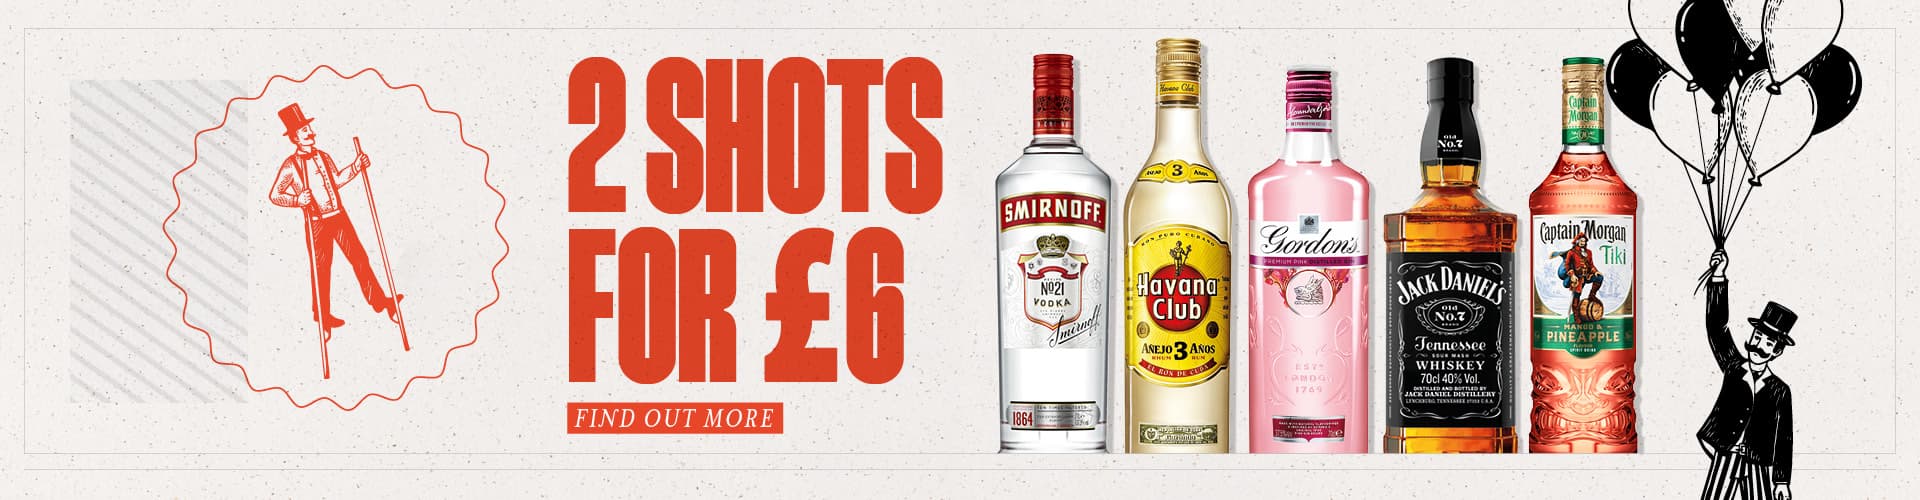 2 Shots for £6. Find out more.